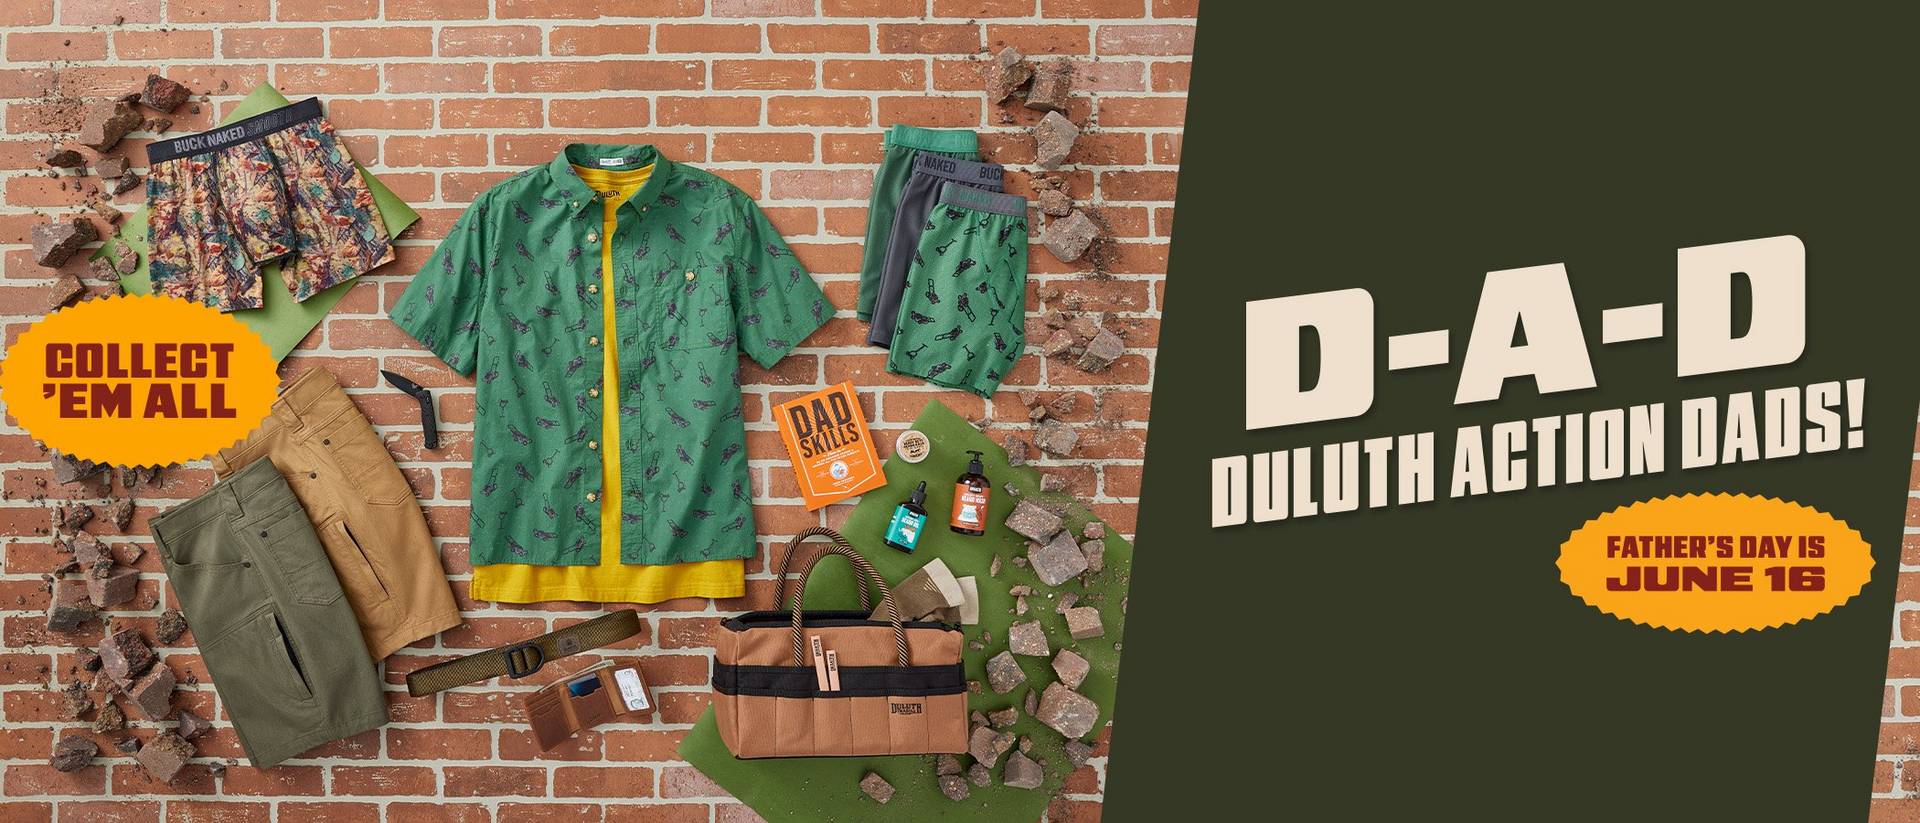 D-A-D Duluth Action Dads! A selection of product in greens, browns and yellow are layed out on a brick background. There is brick rubble along the edges as if they product has smashed through a brick wall. A yellow burst states that Father's Day is June 16.